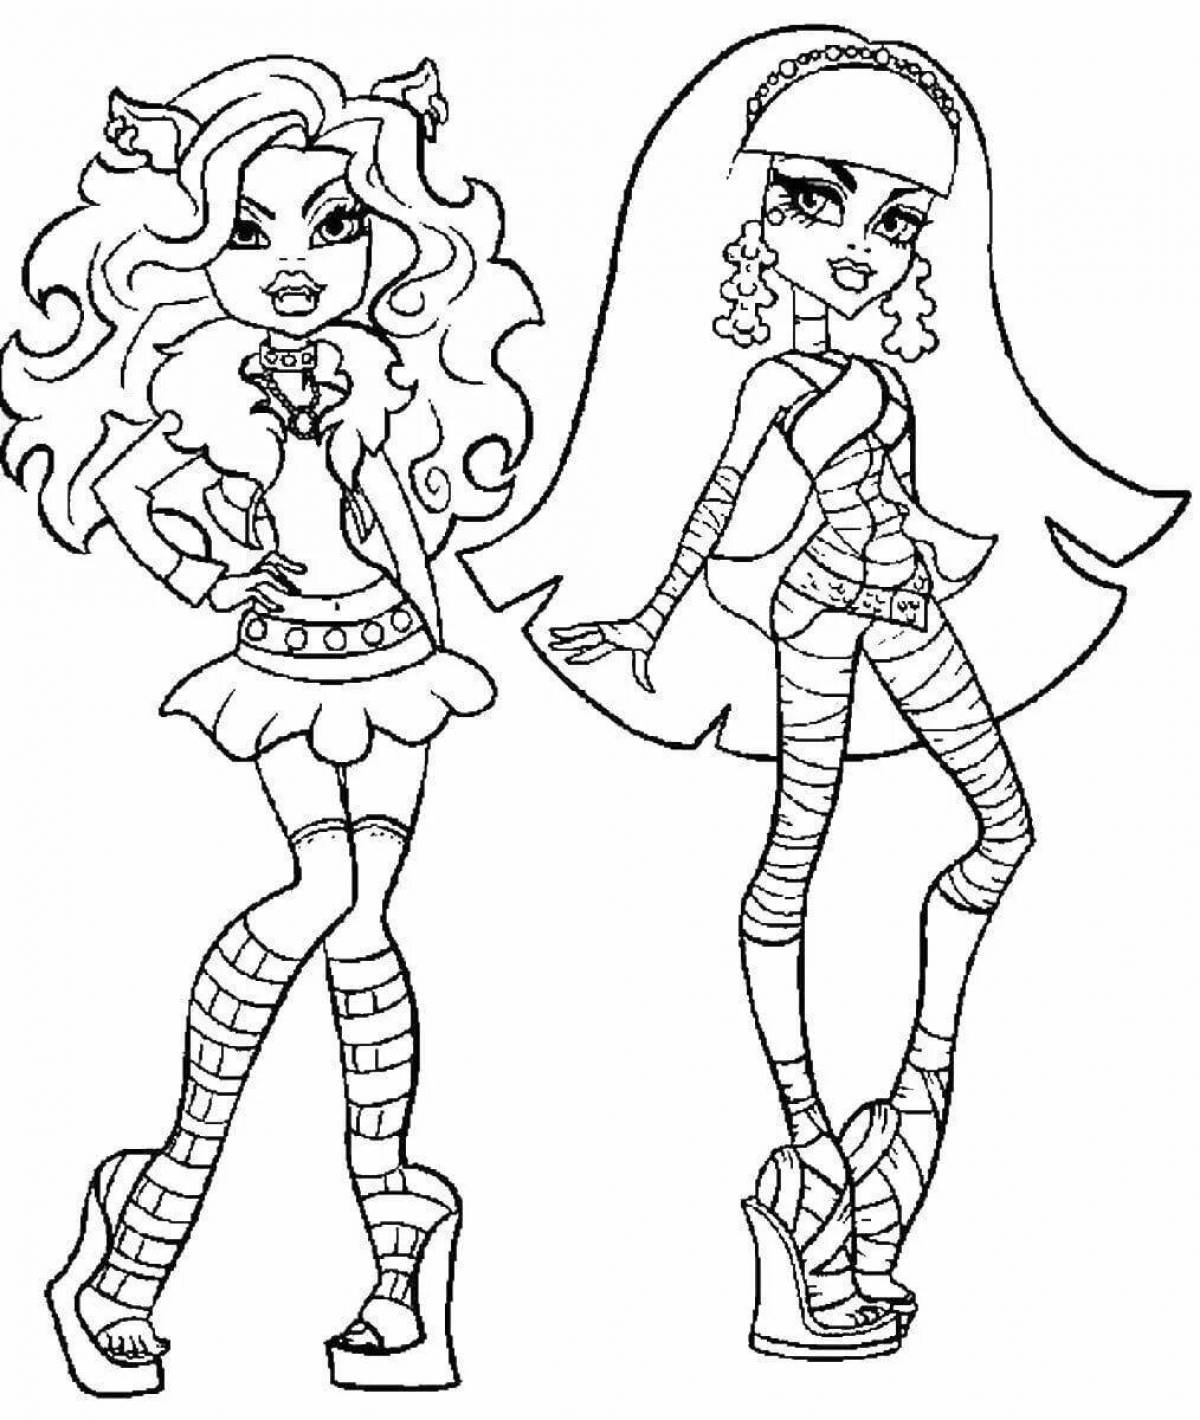 Monster high fun coloring page